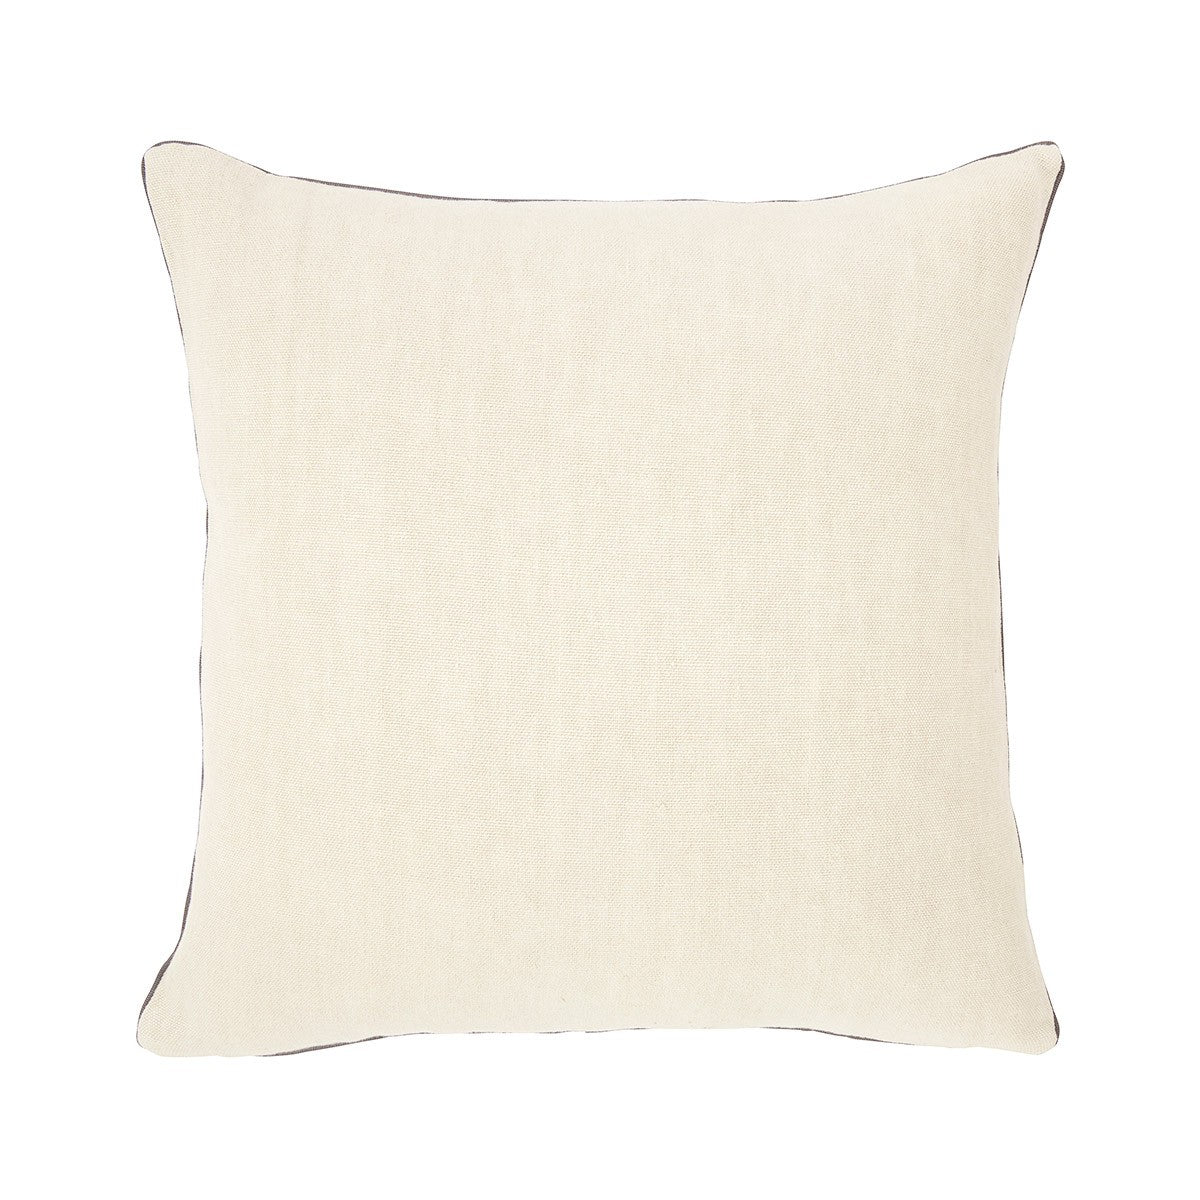 Iosis Pigment Accent Pillow